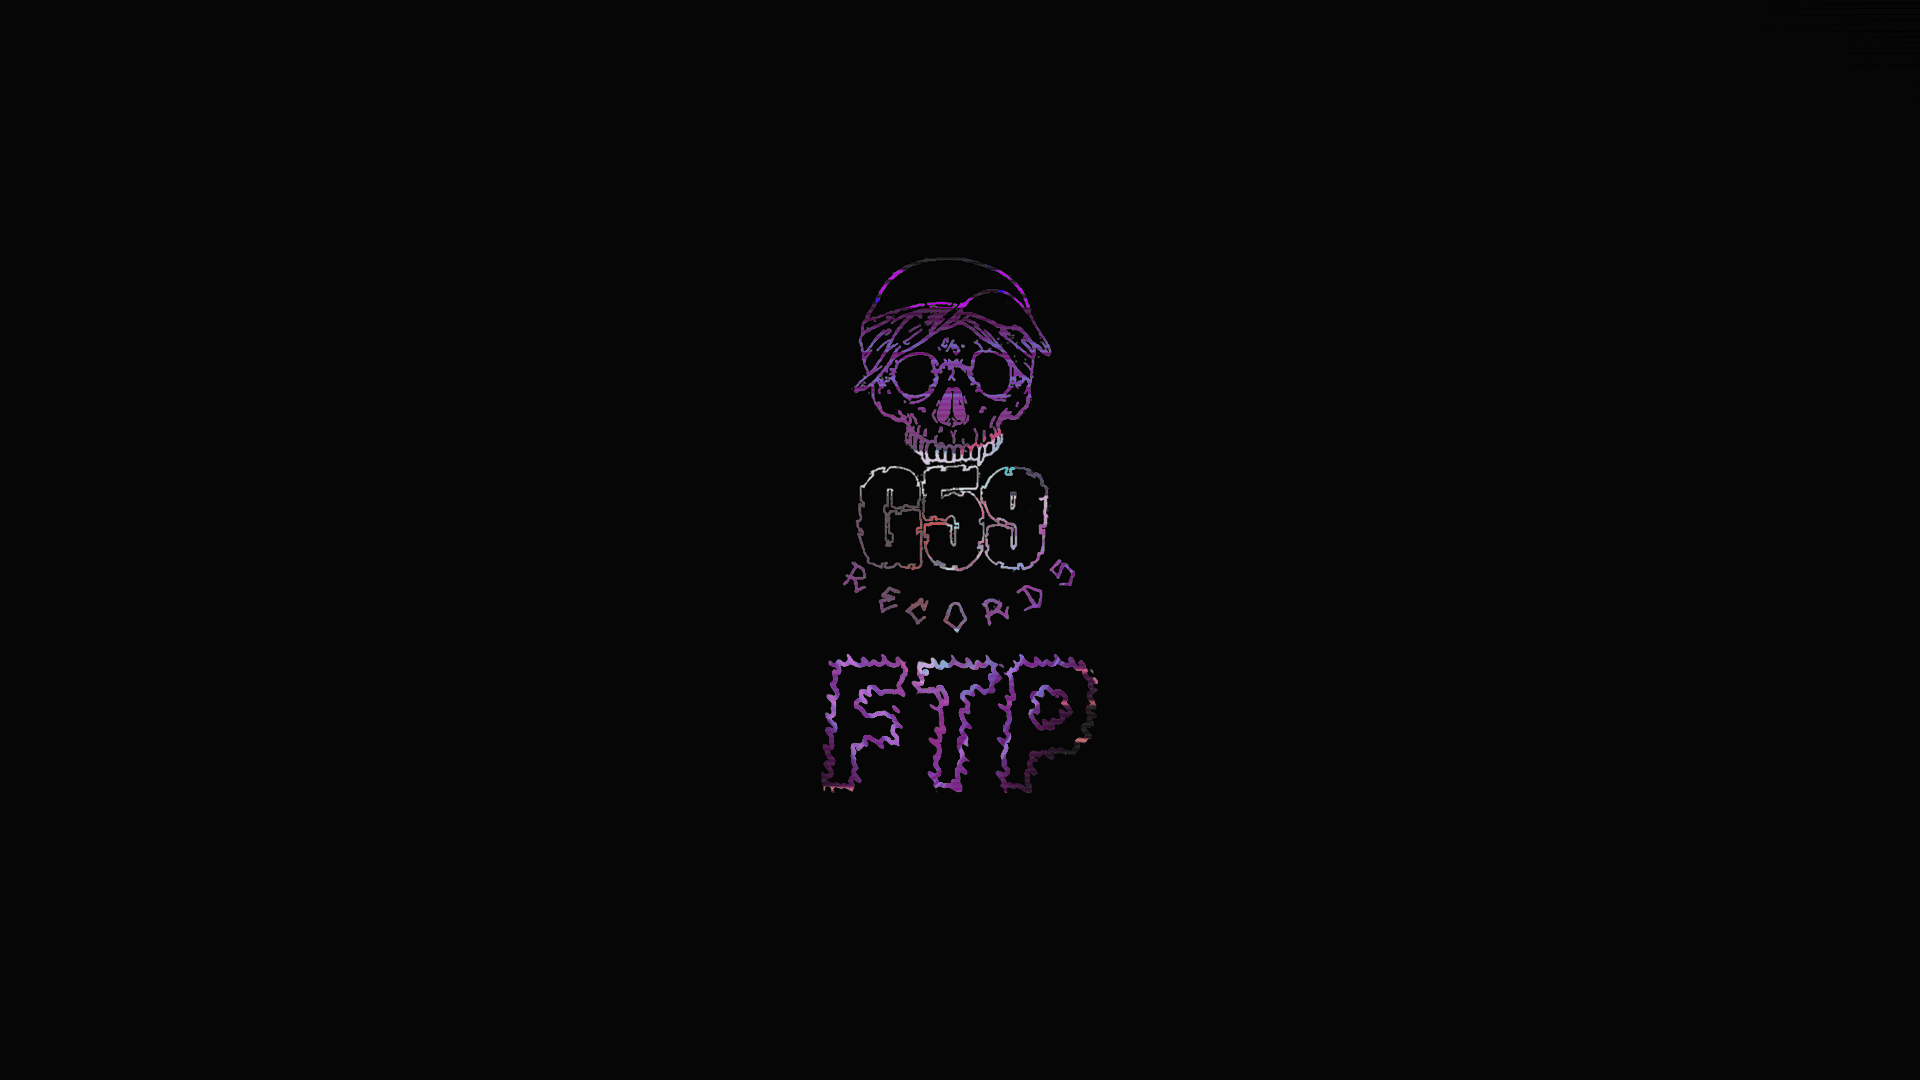 Made some wallpaper with the G59 logo!